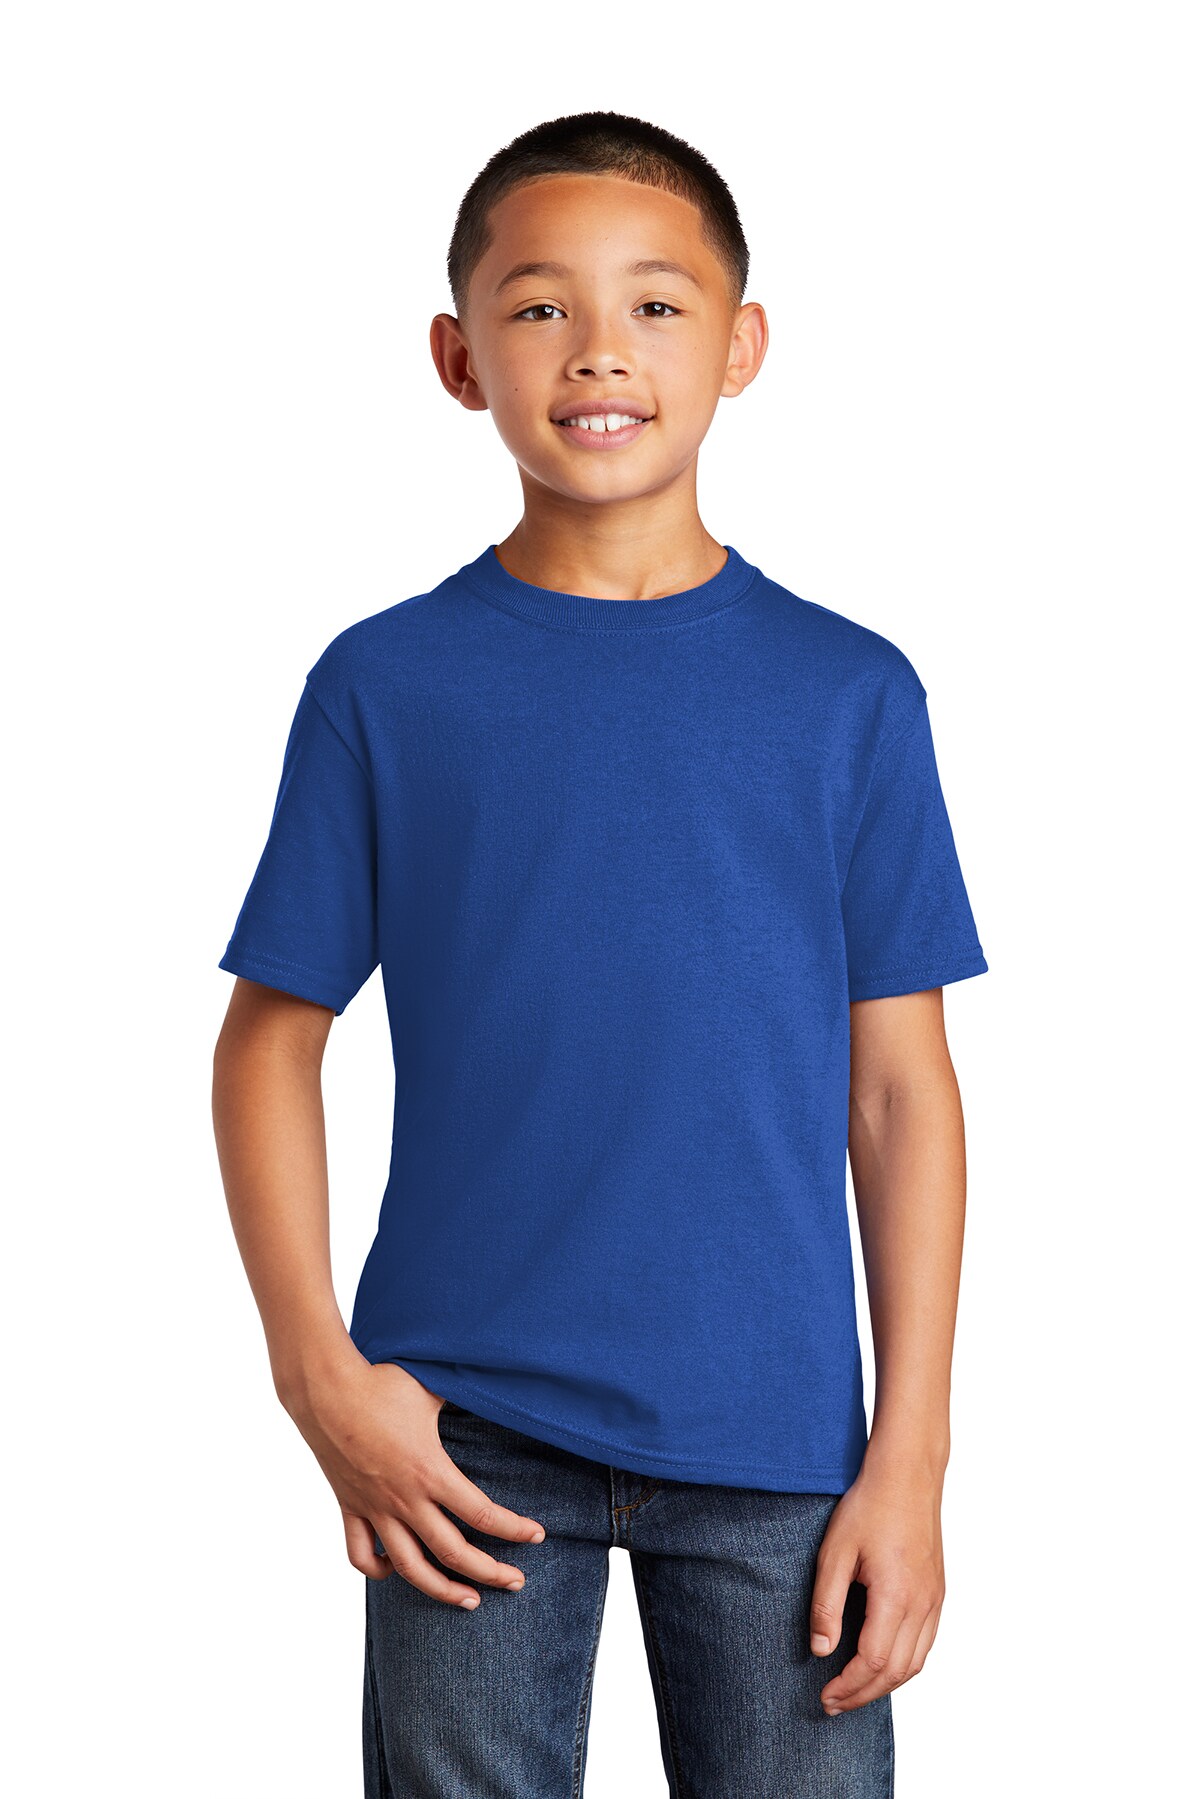 High-Quality T-Shirts for Kids and Youth at Affordable Prices, Cool and  Cute T-shirts for Fashion-Forward Kids - Summer Tees, RADYAN